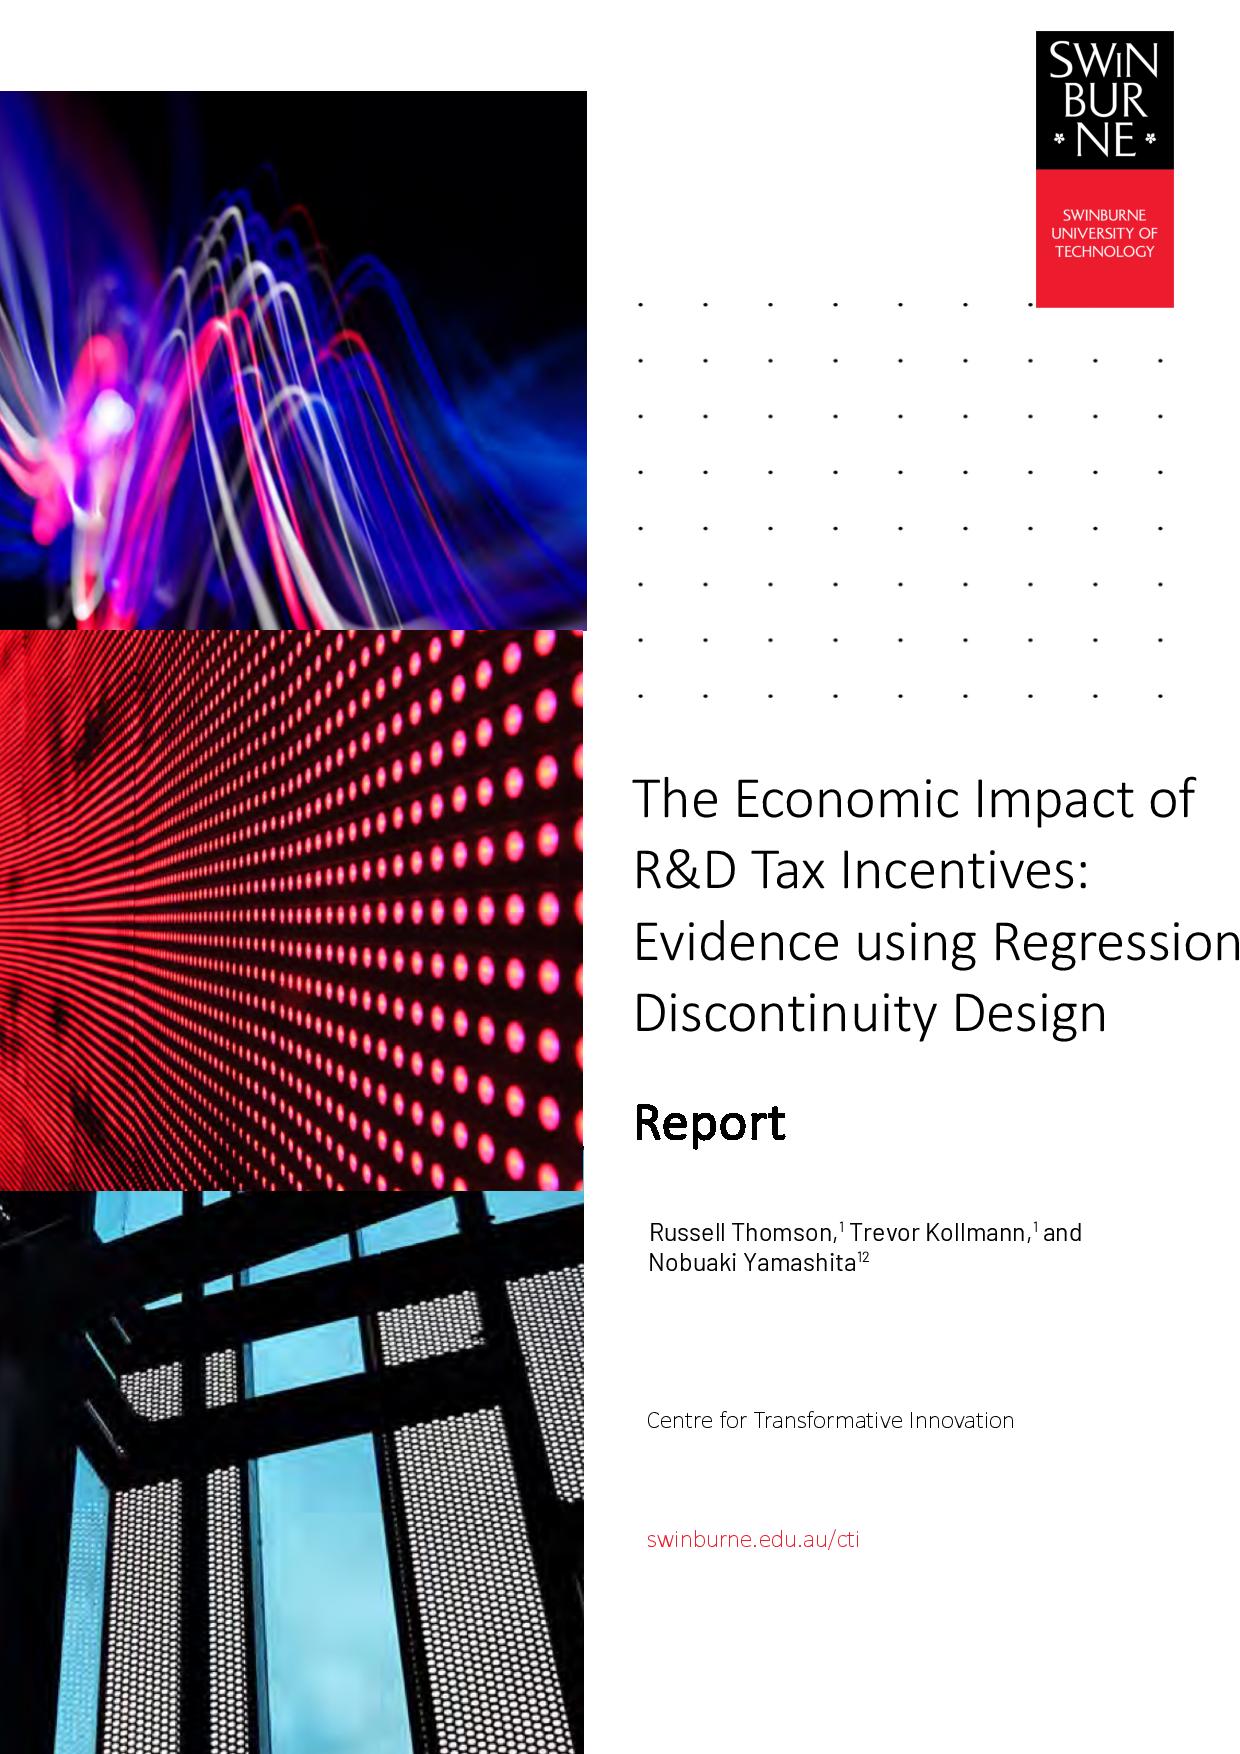 The Economic Impact of R&D Tax Incentives: Evidence using Regression Discontinuity Design